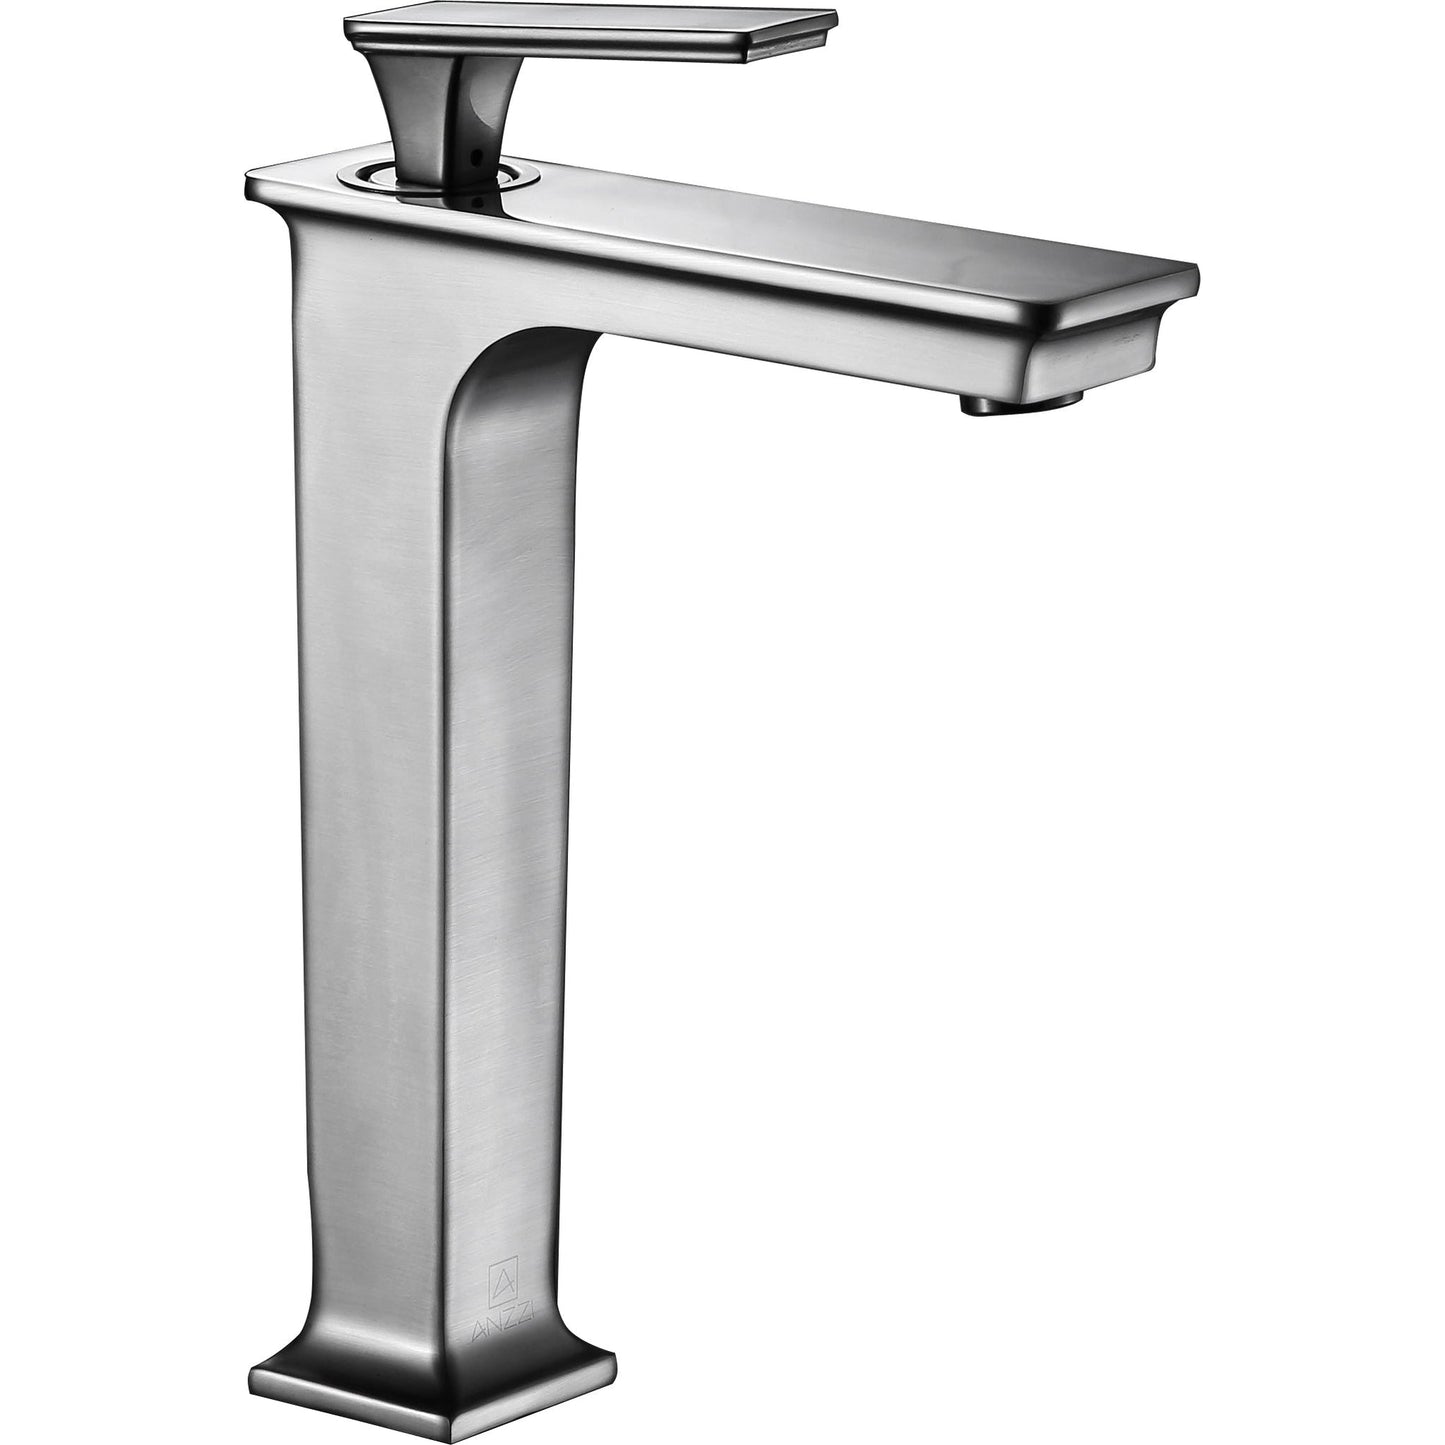 ANZZI Saunter Series 9" Single Hole Brushed Nickel Bathroom Sink Faucet